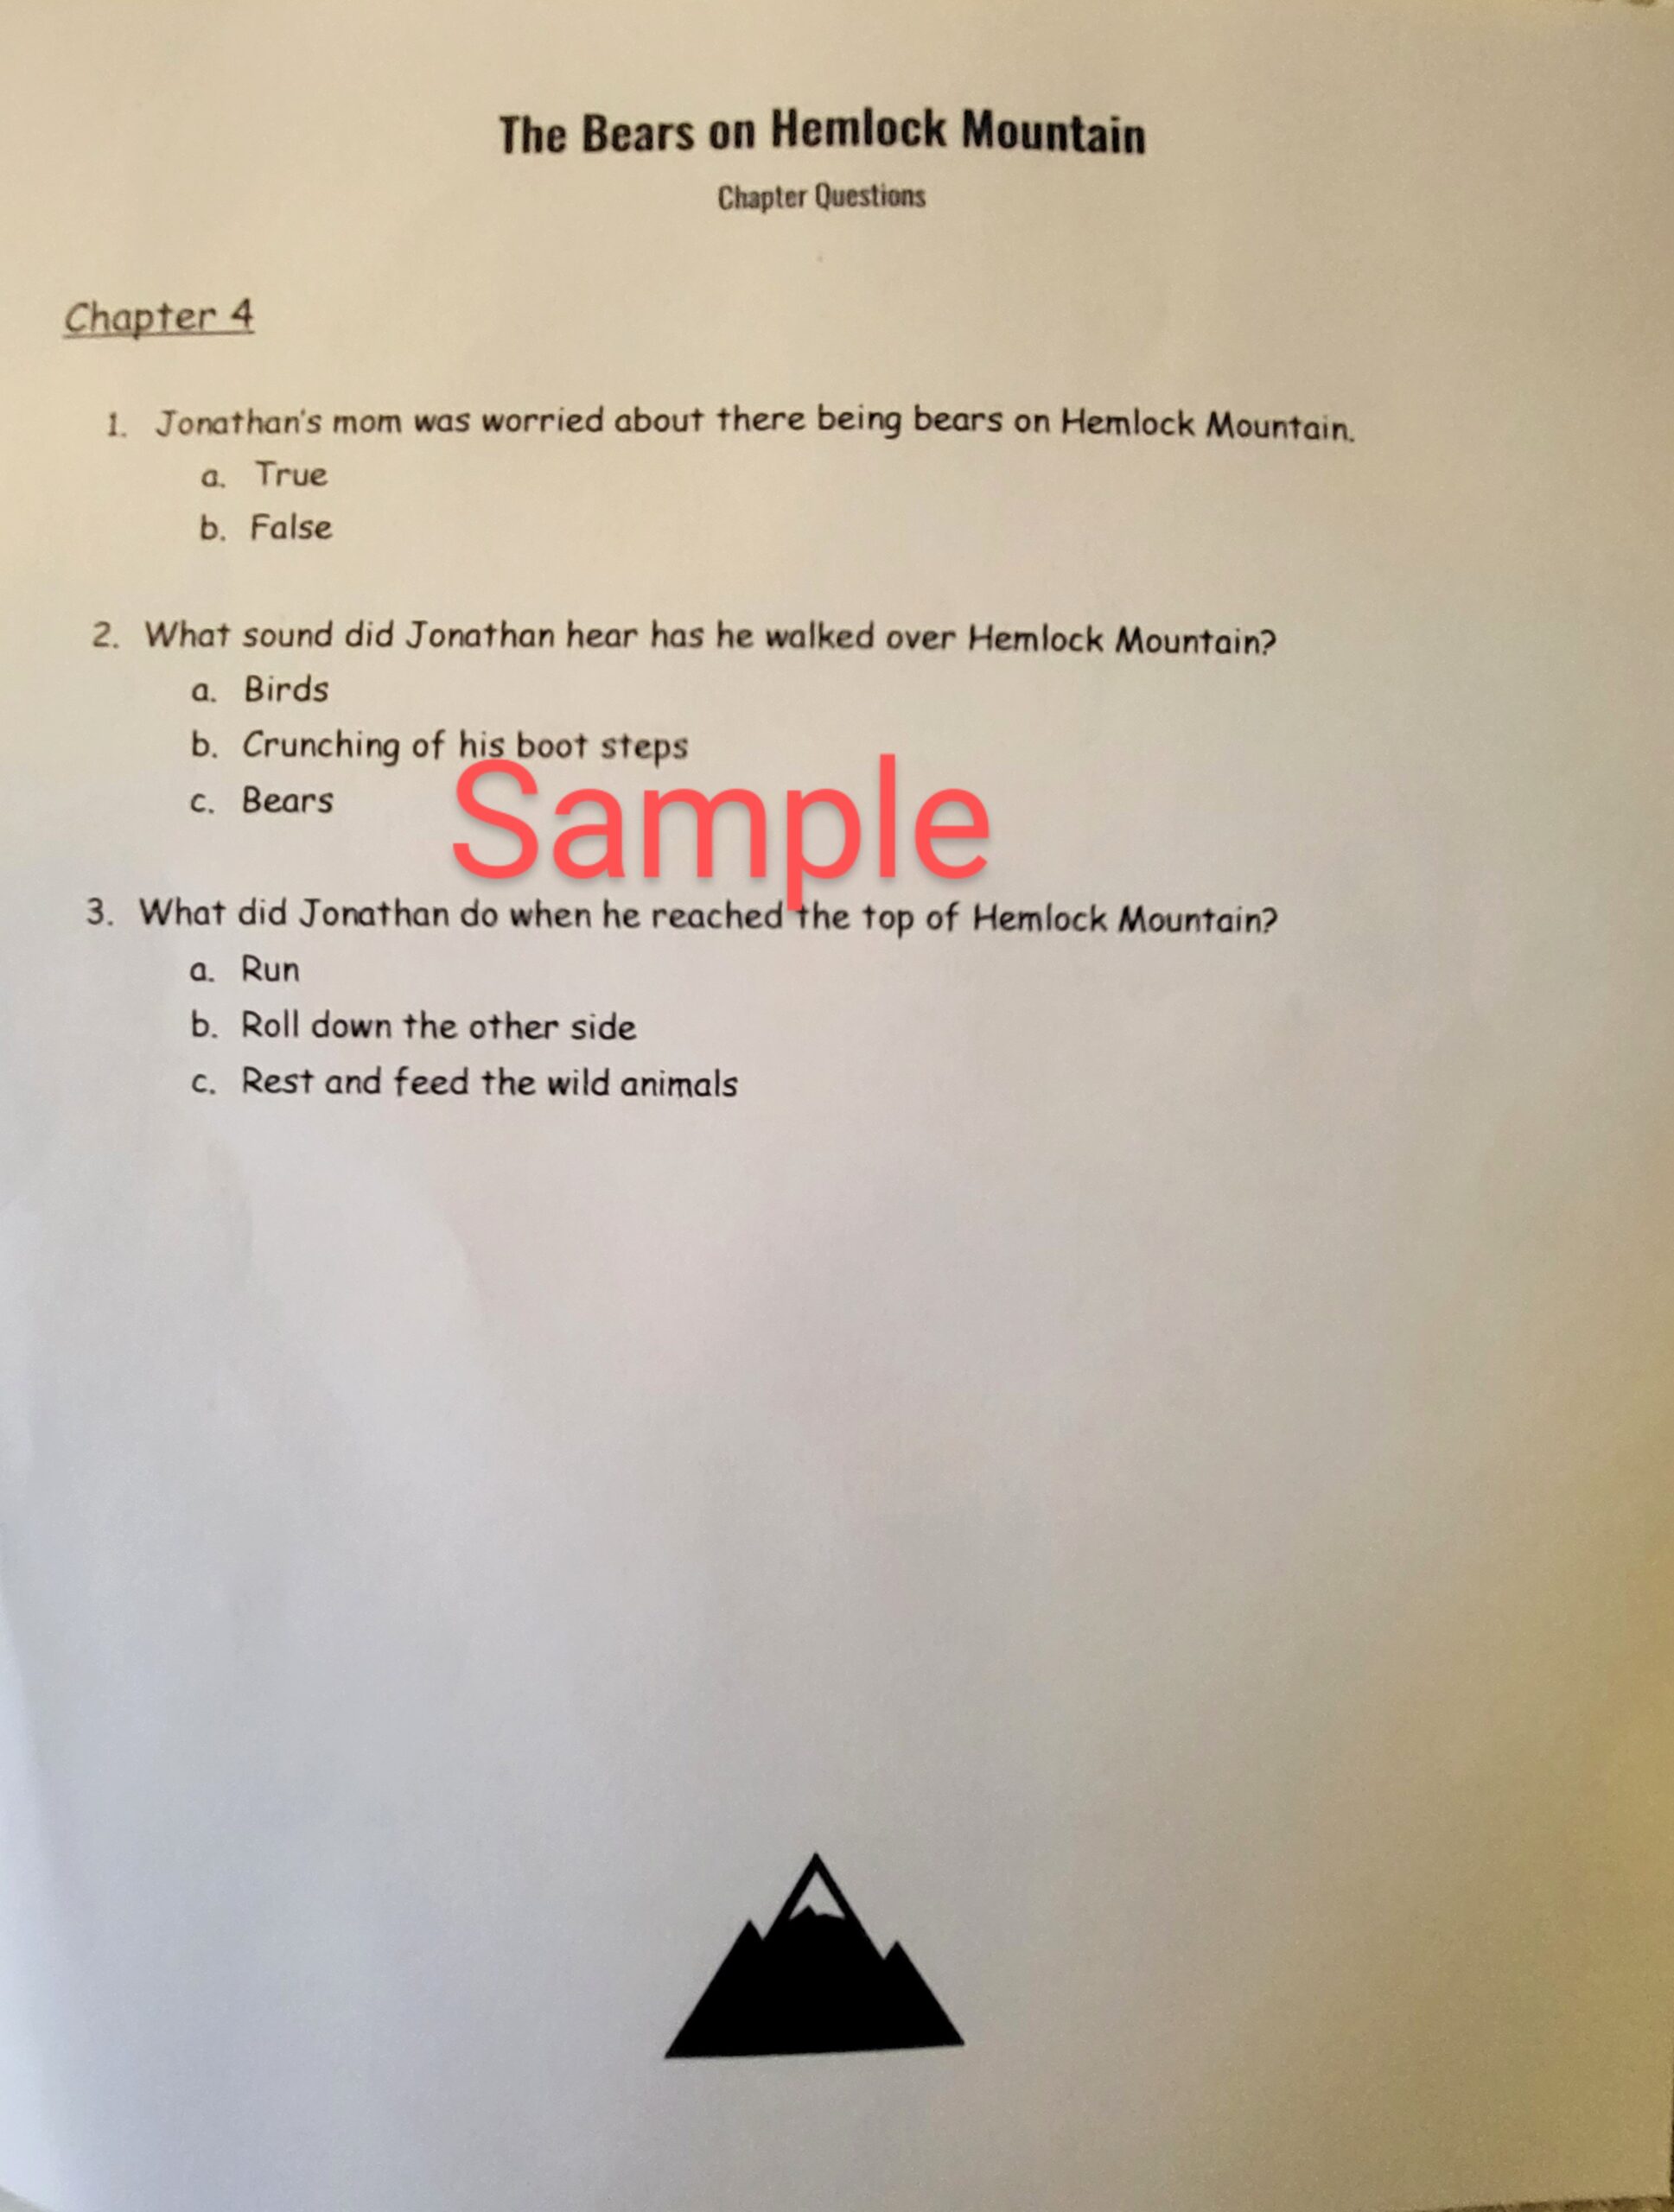 A sample of The Bears on Hemlock Mountain Chapter Questions